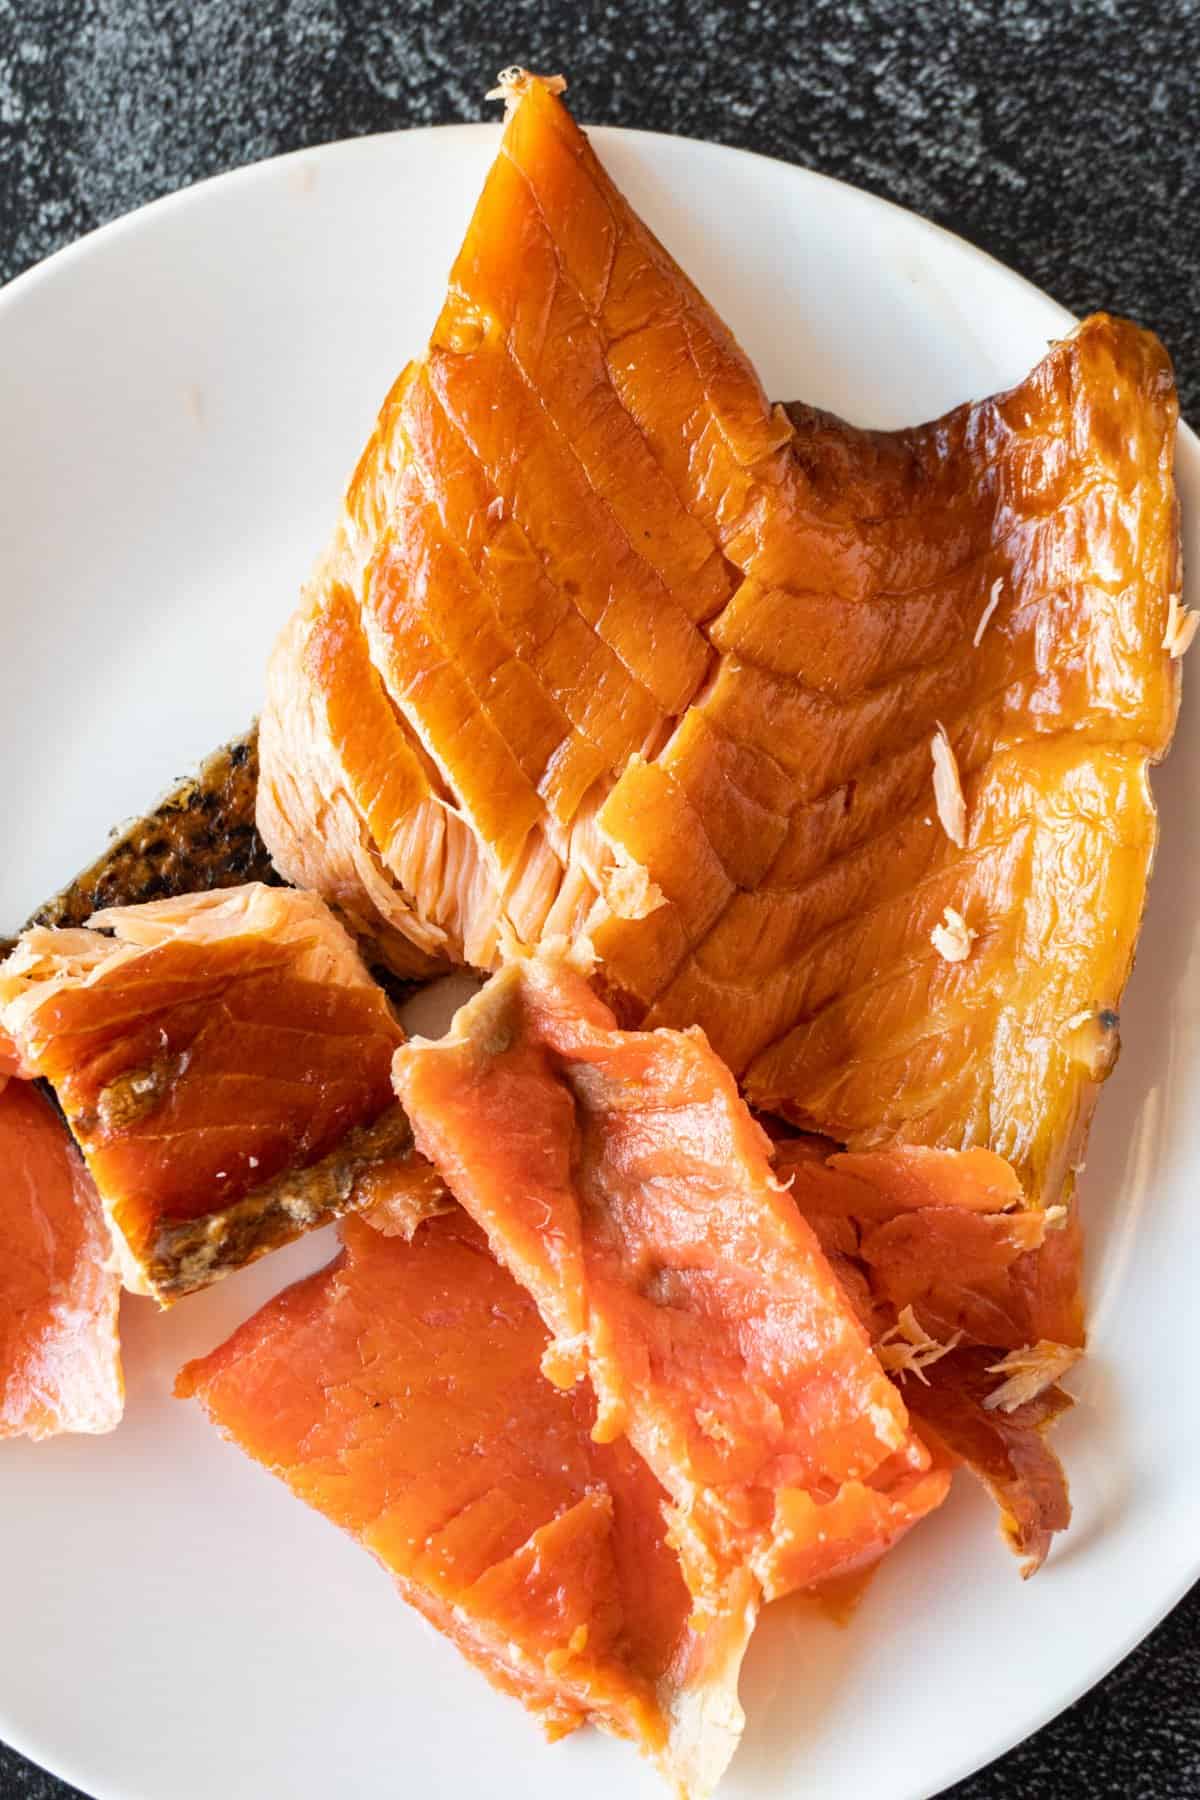 smoked salmon gone bad- yellow in color